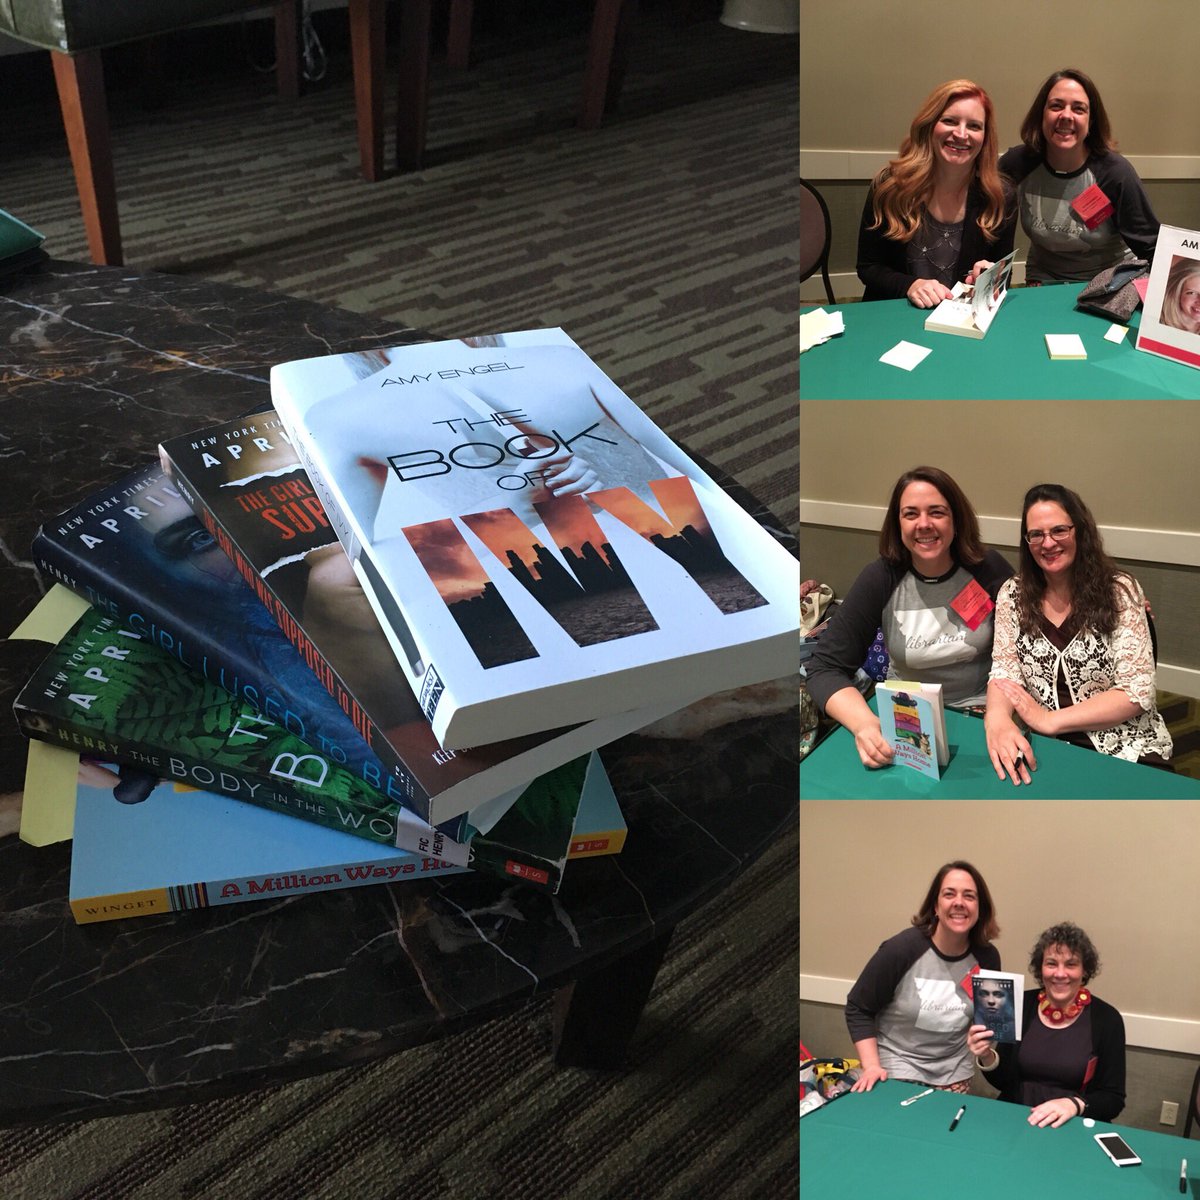 One of the best parts of #maslsc is meeting fantastic authors and getting signed copies of their books! #whatwedo @aprilhenrybooks @DiannaMWinget @aengelwrites